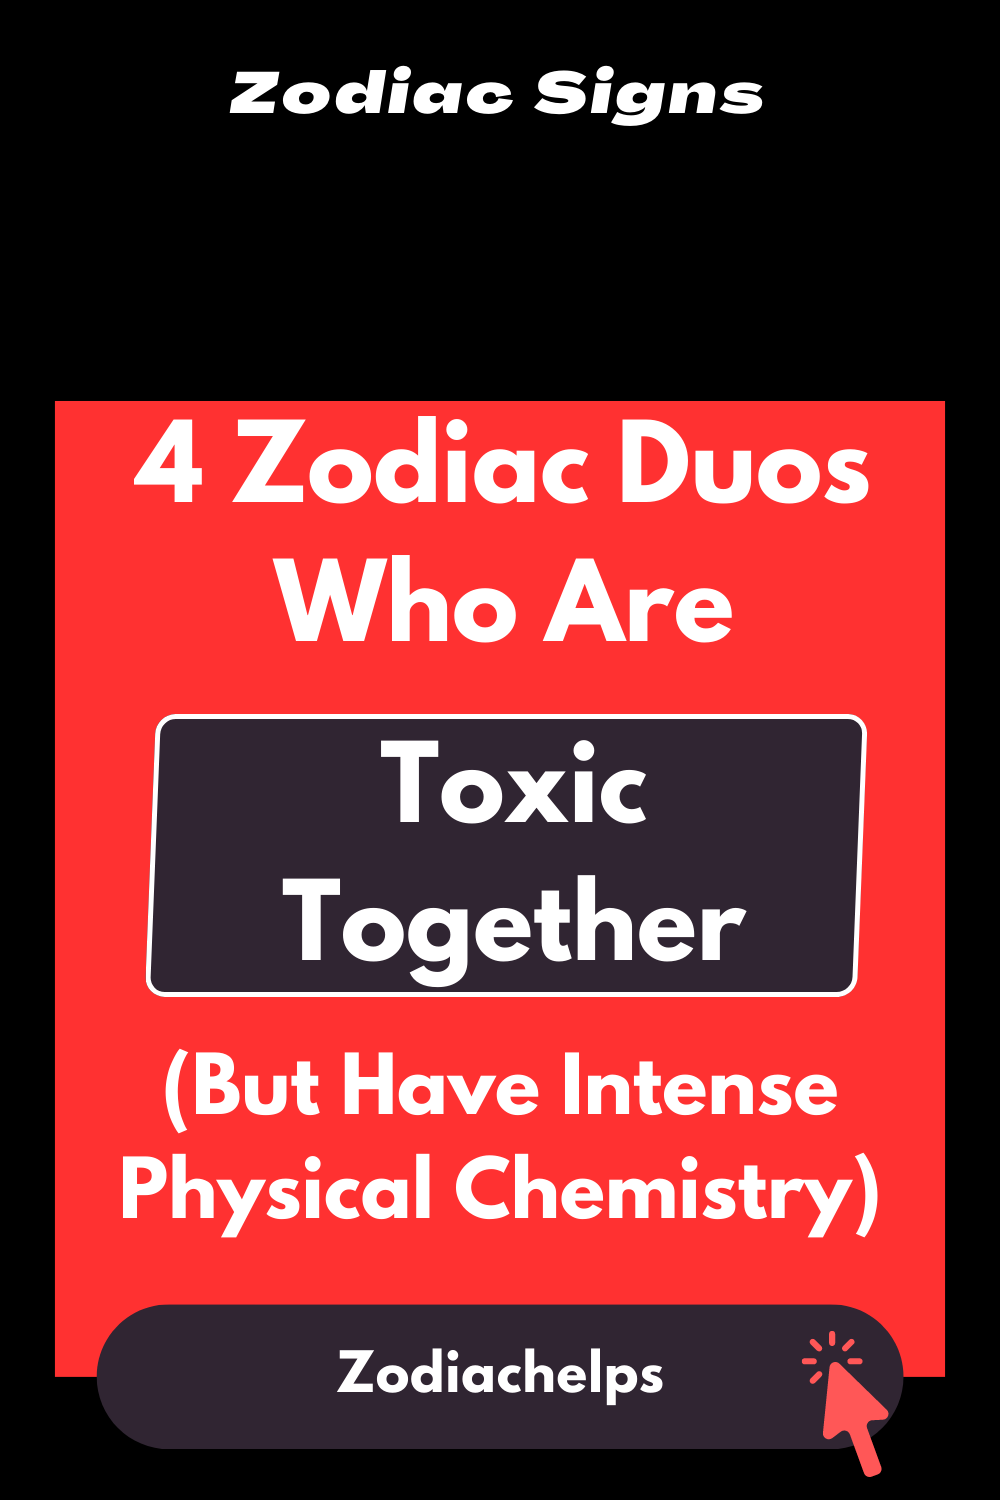 4 Zodiac Duos Who Are Toxic Together (But Have Intense Physical Chemistry)